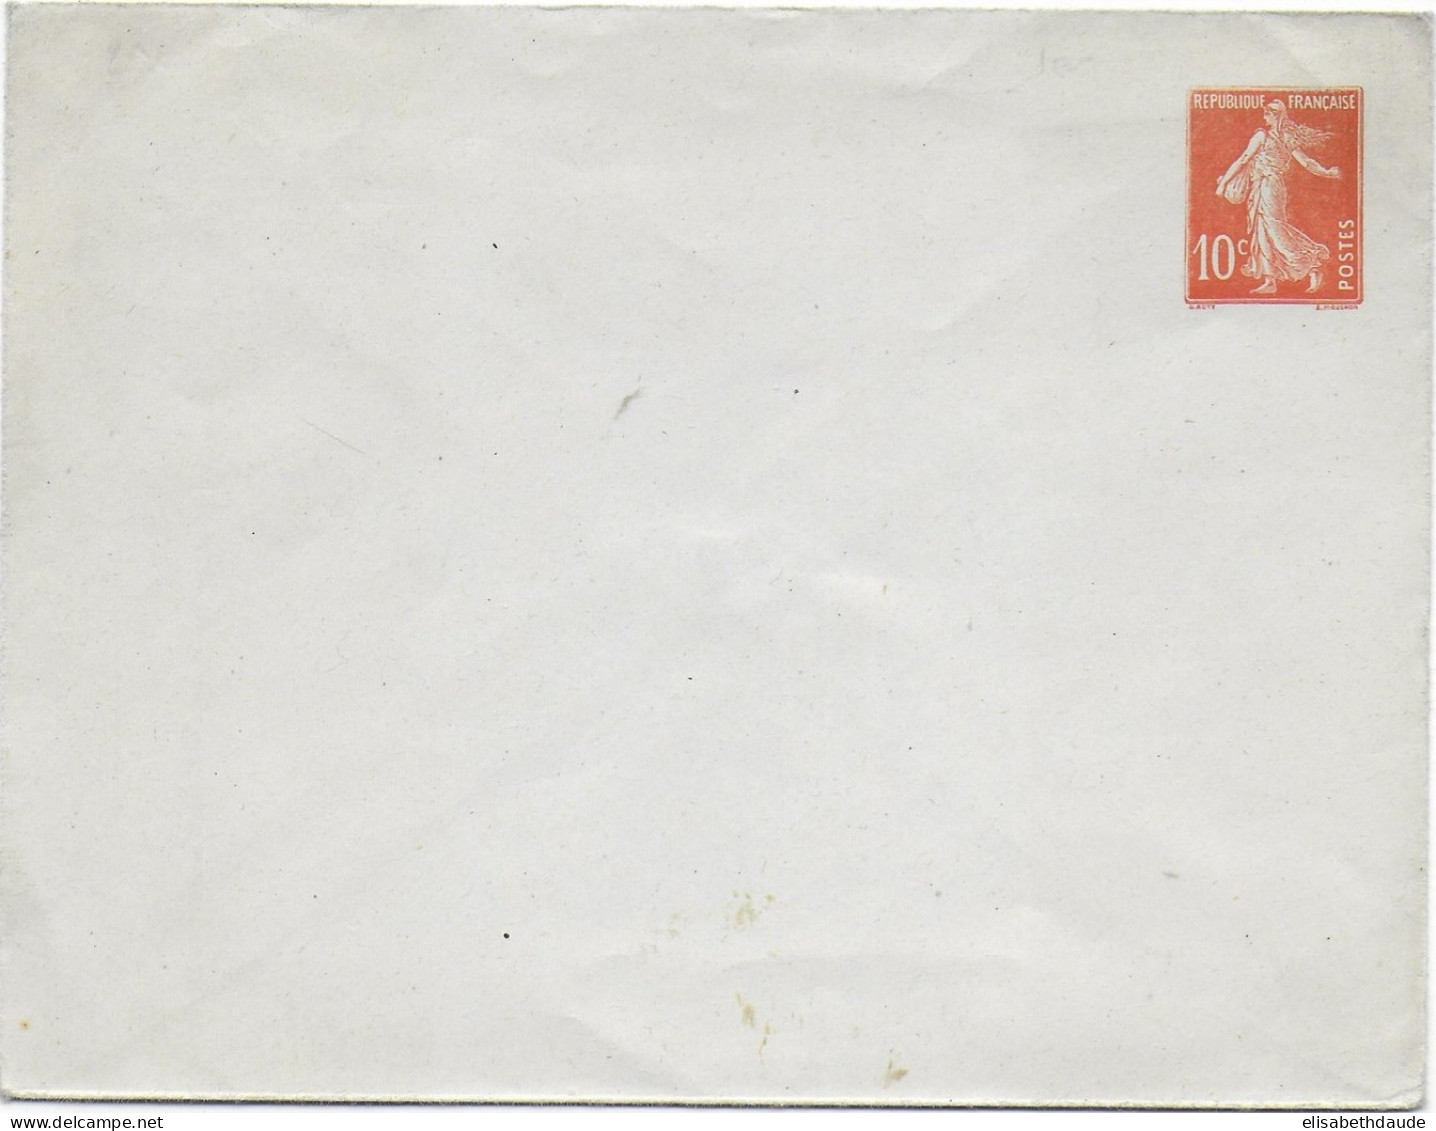 1908 - TYPE SEMEUSE - ENVELOPPE ENTIER NEUVE 147X112 - STORCH E18 - DATE 815 - Standard Covers & Stamped On Demand (before 1995)